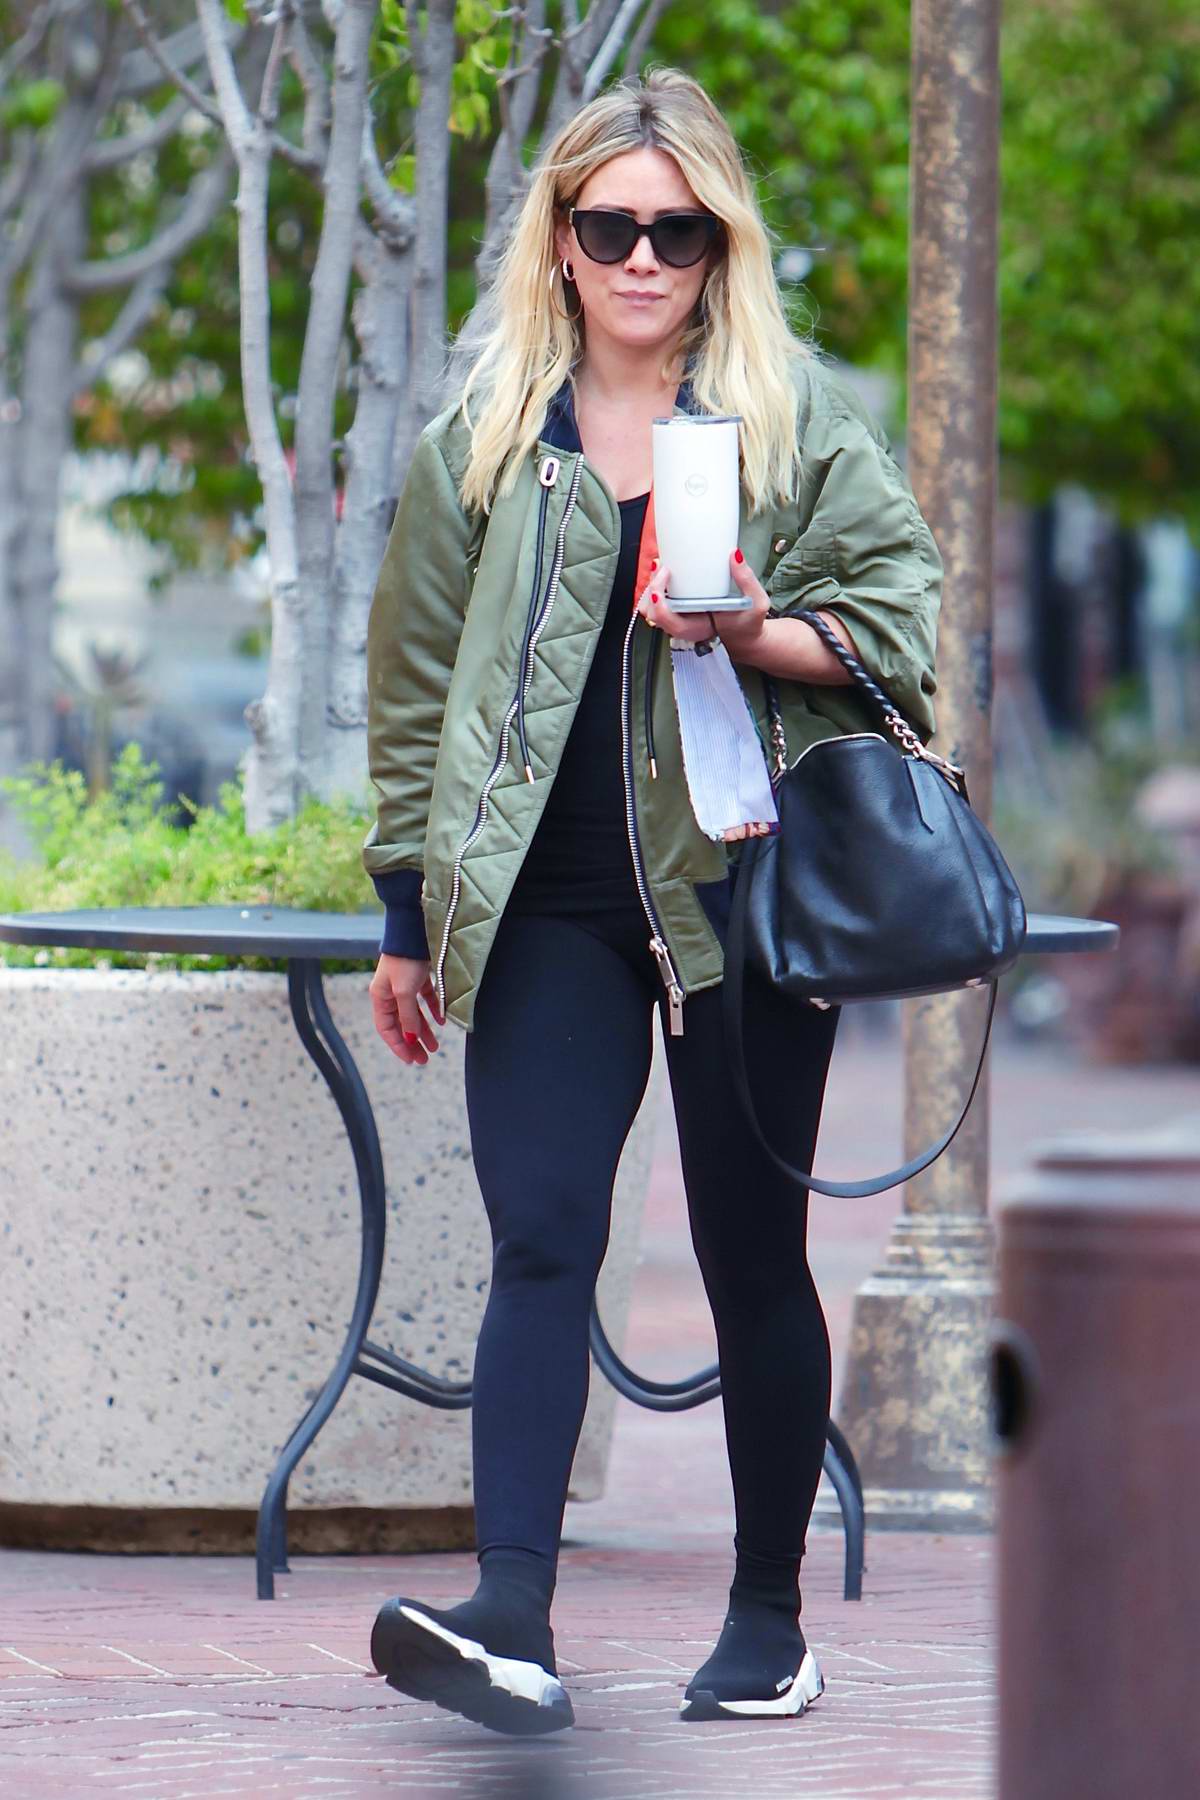 Get Hilary Duff's Iro Jeffry Bomber Jacket and Chloé Marcie Satchel Bag,  Worn at Restoration Hardware in West Hollywood – Urban Sybaris